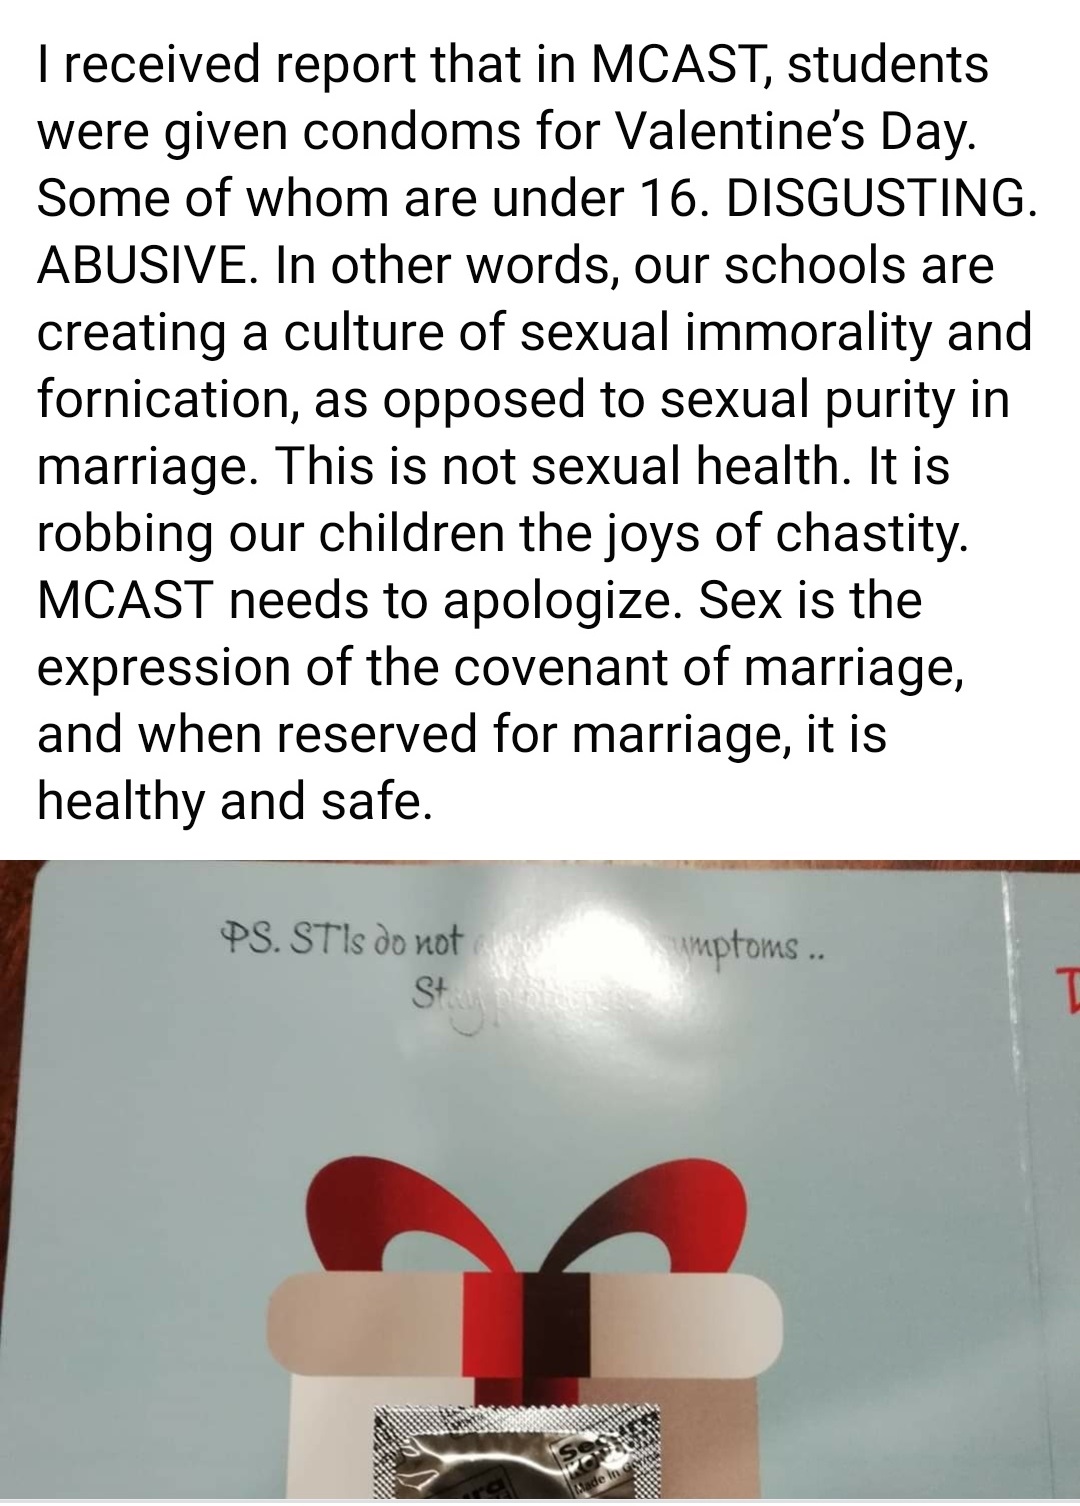 paper - I received report that in Mcast, students were given condoms for Valentine's Day. Some of whom are under 16. Disgusting. Abusive. In other words, our schools are creating a culture of sexual immorality and fornication, as opposed to sexual purity 